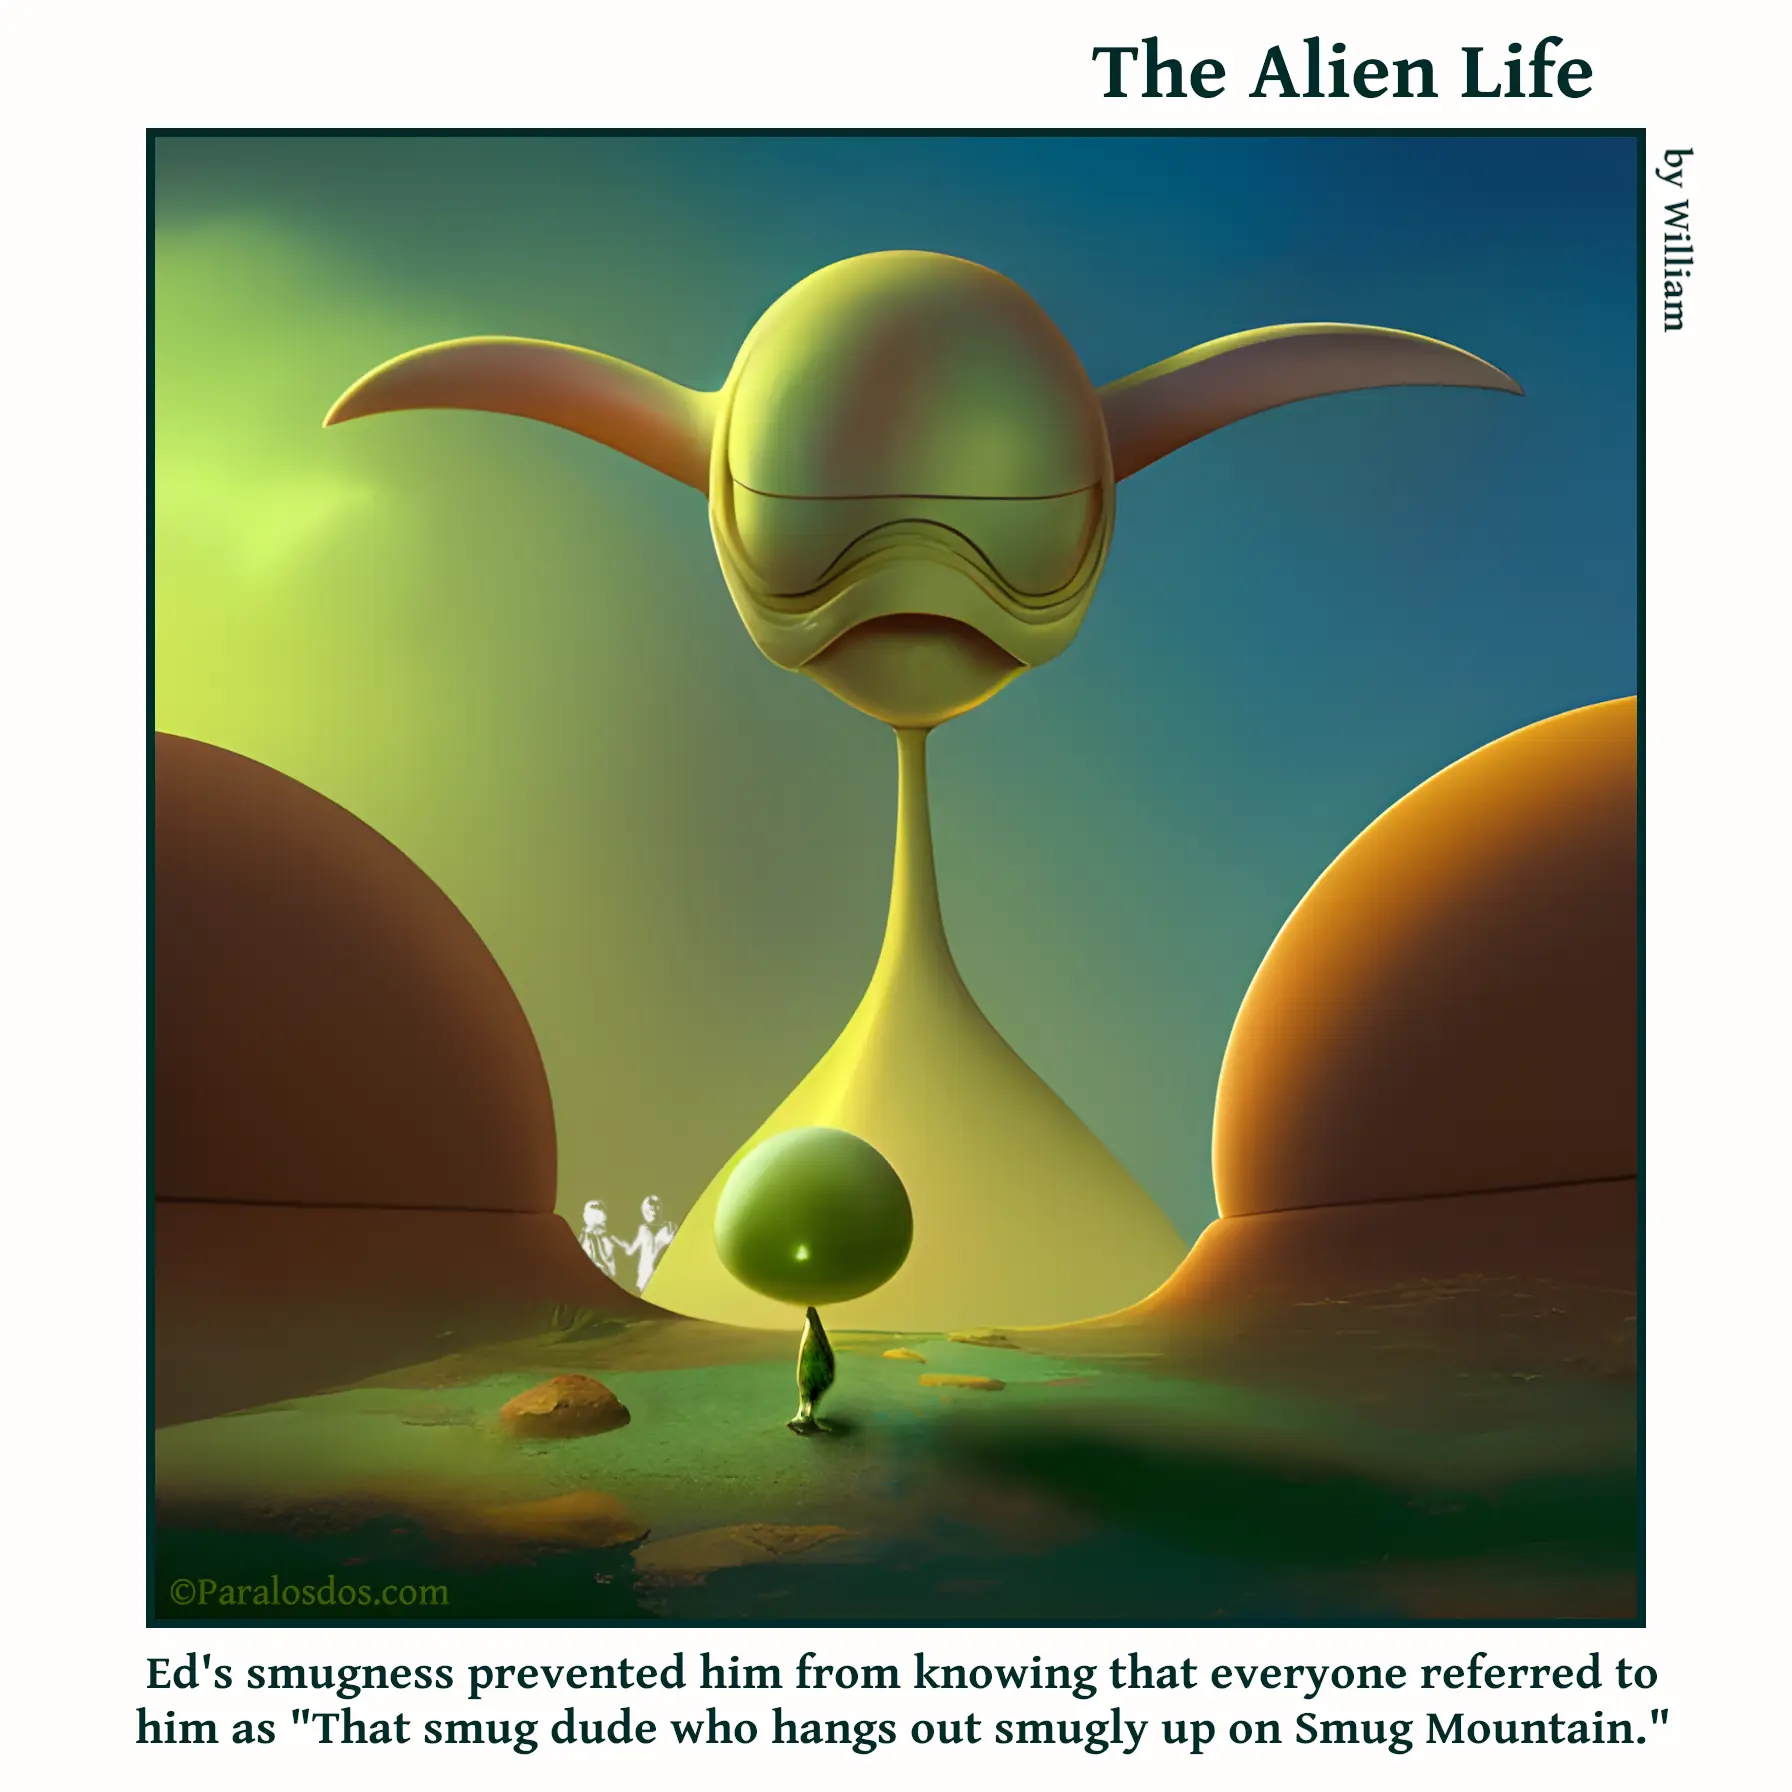 The Alien Life, one panel Comic. A giant smug-faced alien is standing between two mountains. There is a small alien looking up at him The caption reads: Ed's smugness prevented him from knowing that everyone referred to him as "That smug dude who hangs out smugly up on Smug Mountain."